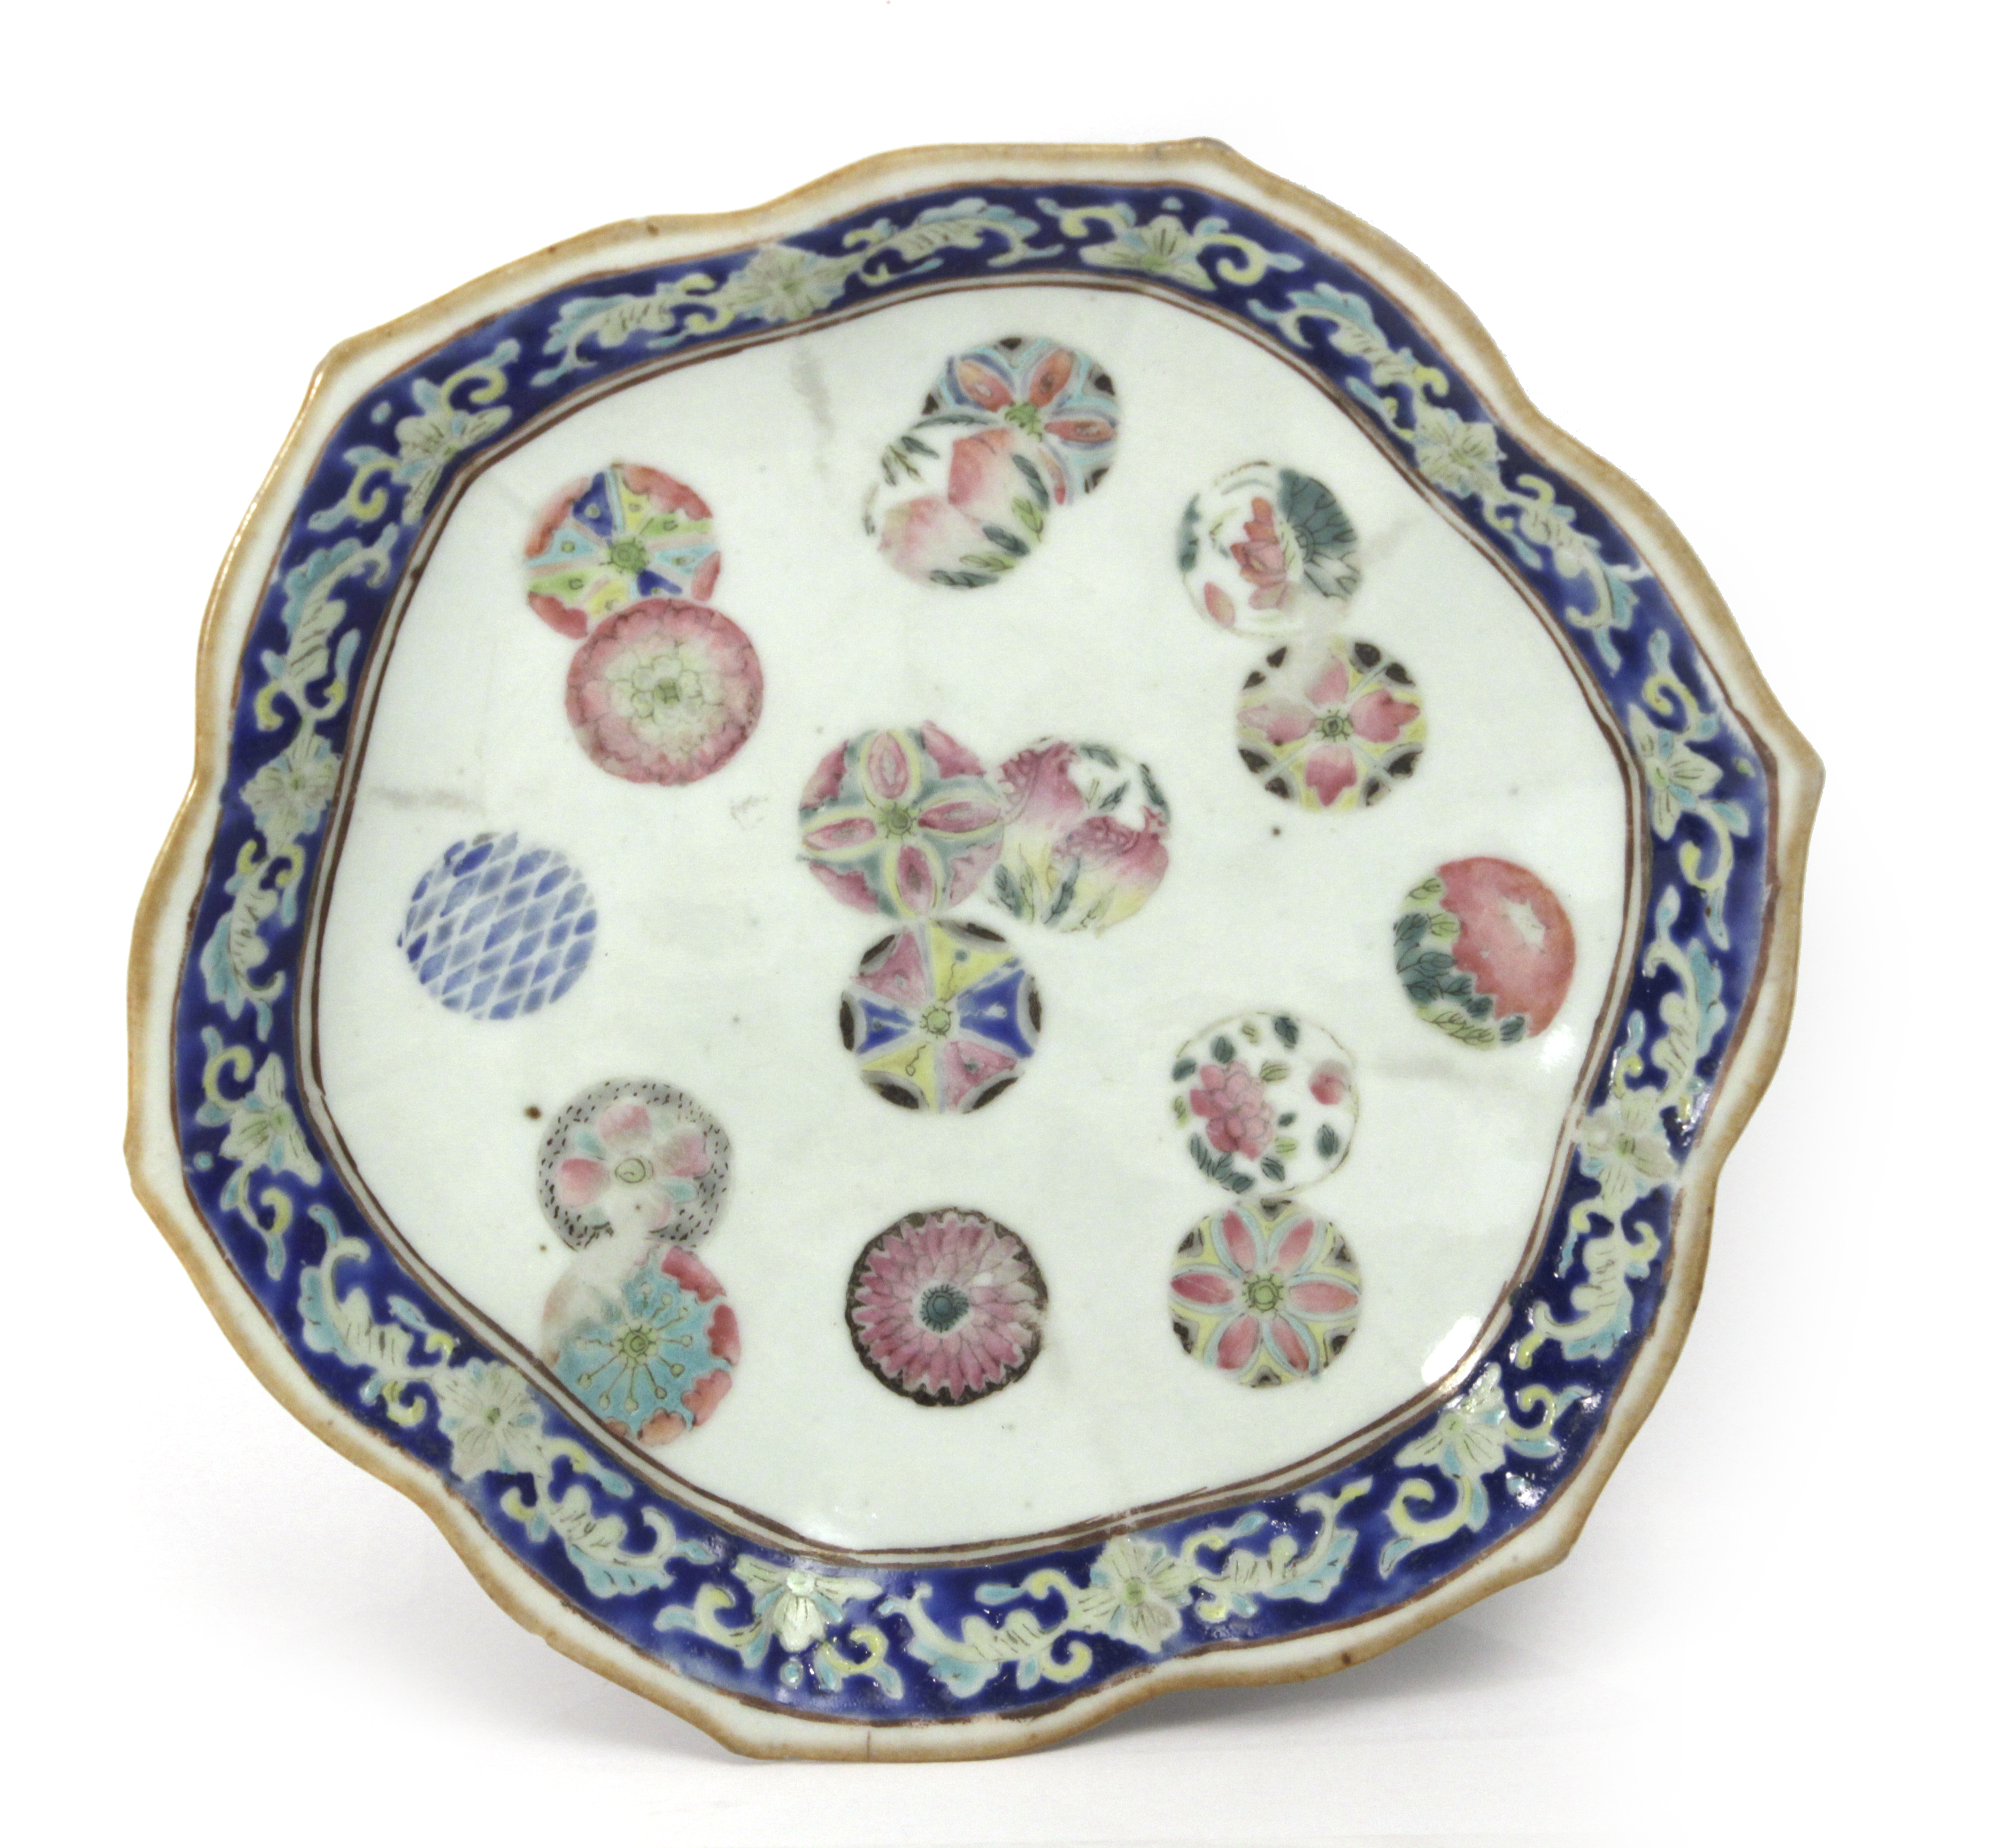 A first half of 20th century Chinese porcelain centrepiece